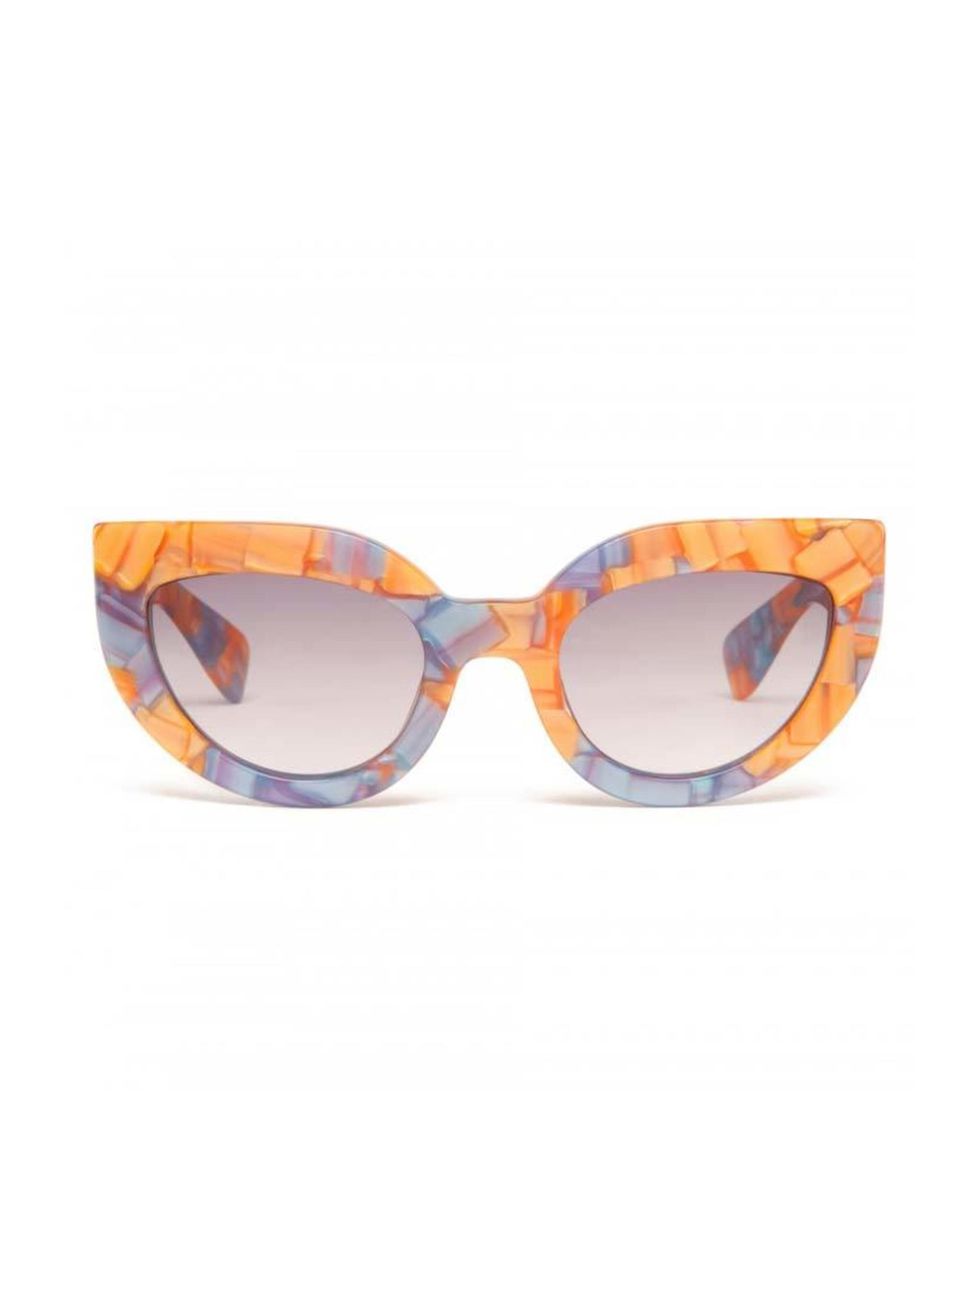 <p>Digital Director Phebe Hunnicutt beat the rest of the team to these just-the-right-amount-of-bonkers sunglasses.</p>

<p> </p>

<p><a href="http://www.bimbaylola.com/shoponline/product.php?id_product=10393&id_category=690" target="_blank">Bimba y Lola<